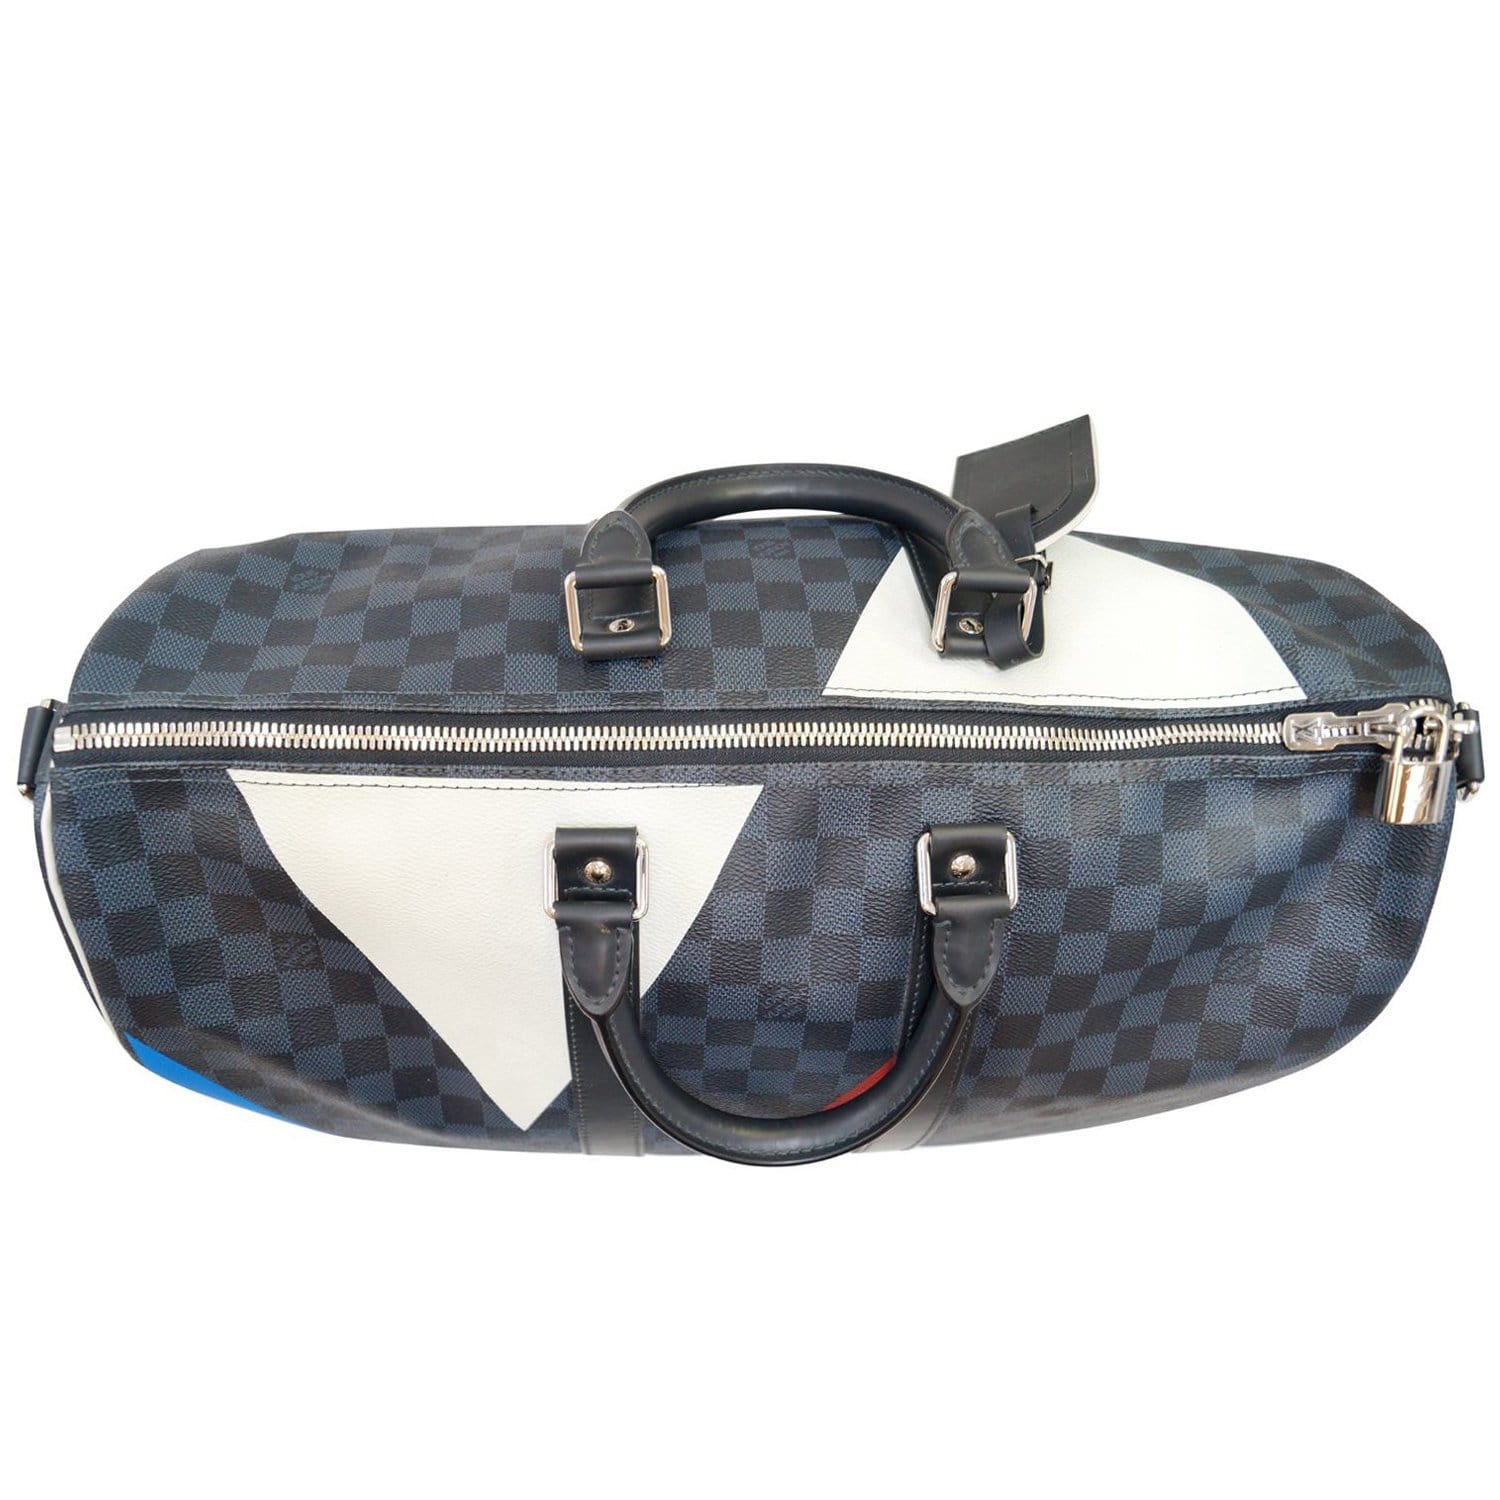 Louis Vuitton Keepall Bandouliere 45 America's Cup Boston Bag